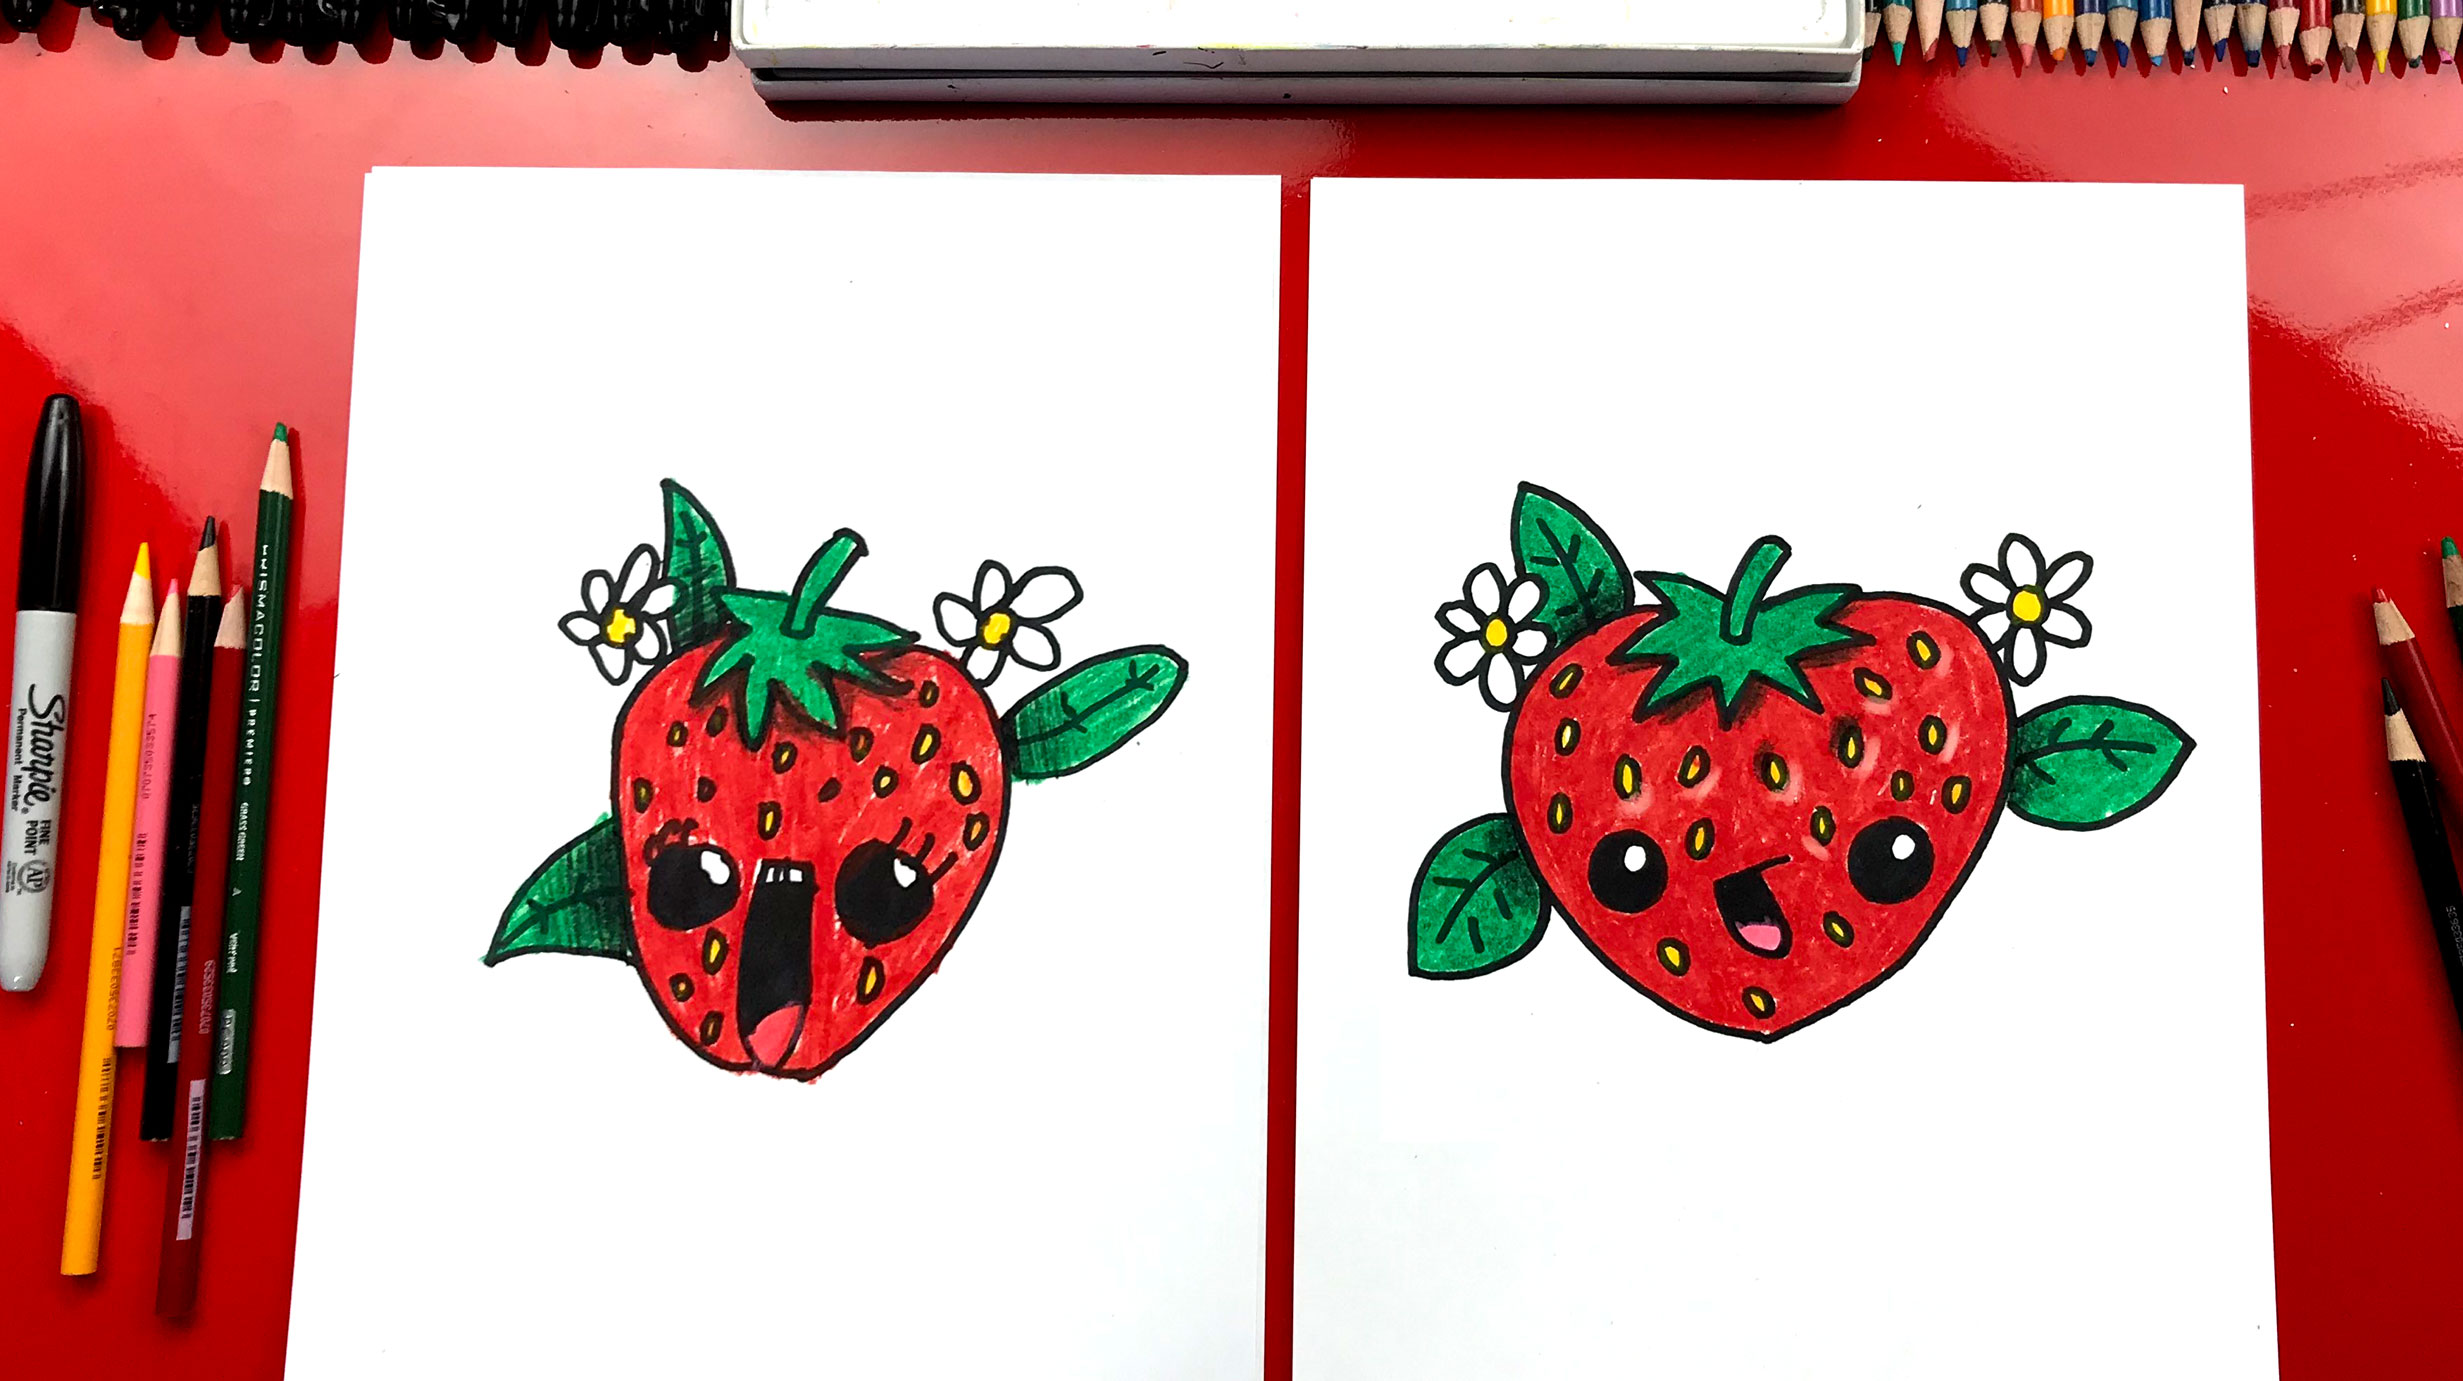 drawing of strawberry